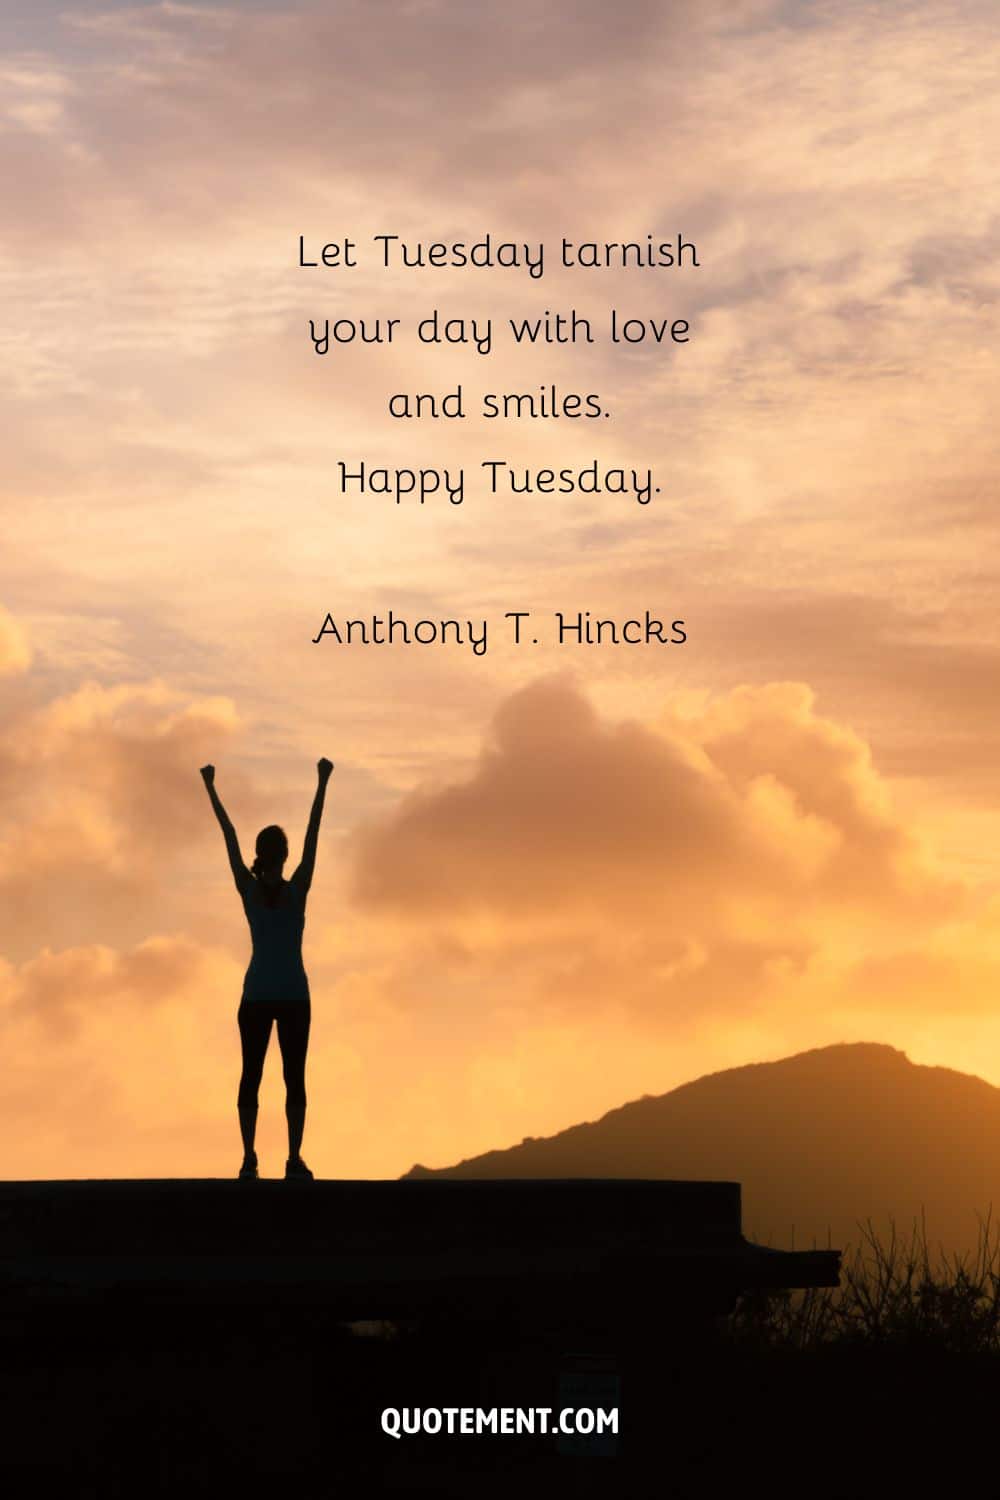 woman in sunset image representing make today great quote